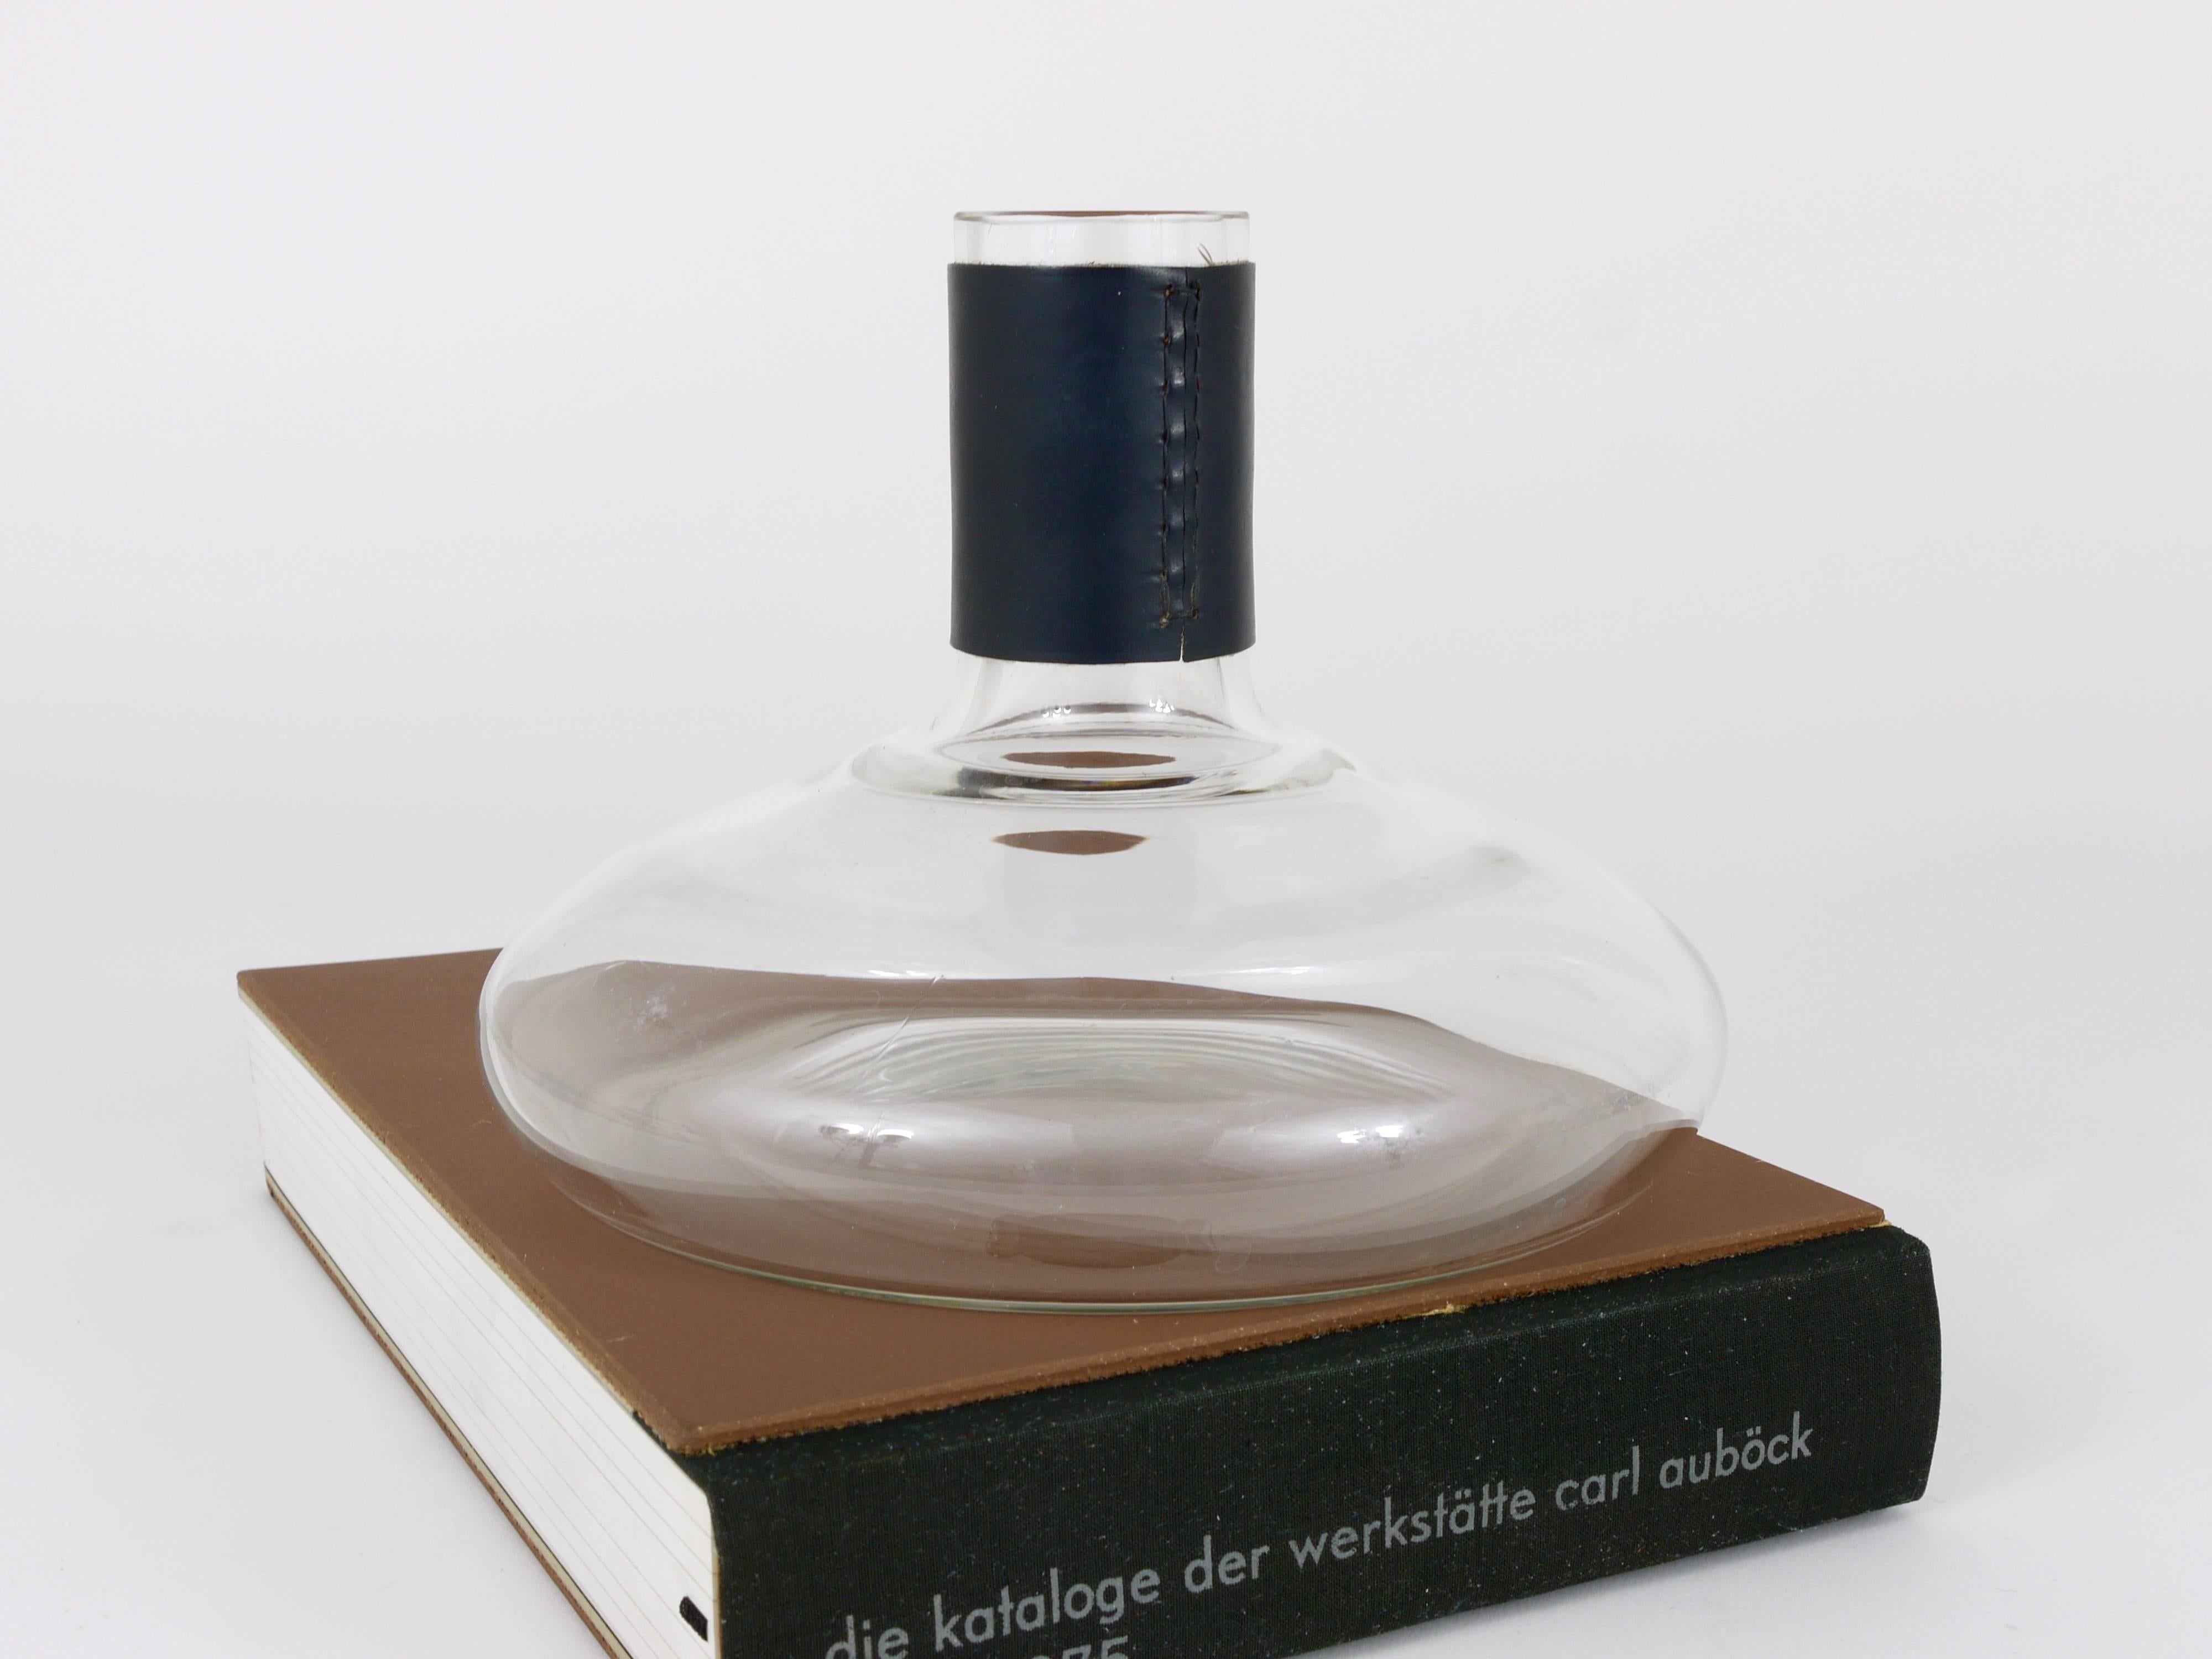 A beautiful Austrian modernist flower vase or wine decanter designed and executed by Carl Auböck in the 1950s. Made of glass with nice black leather top. In very good condition. Measure: Height 6 1/2 in, diameter 8 1/2 in.